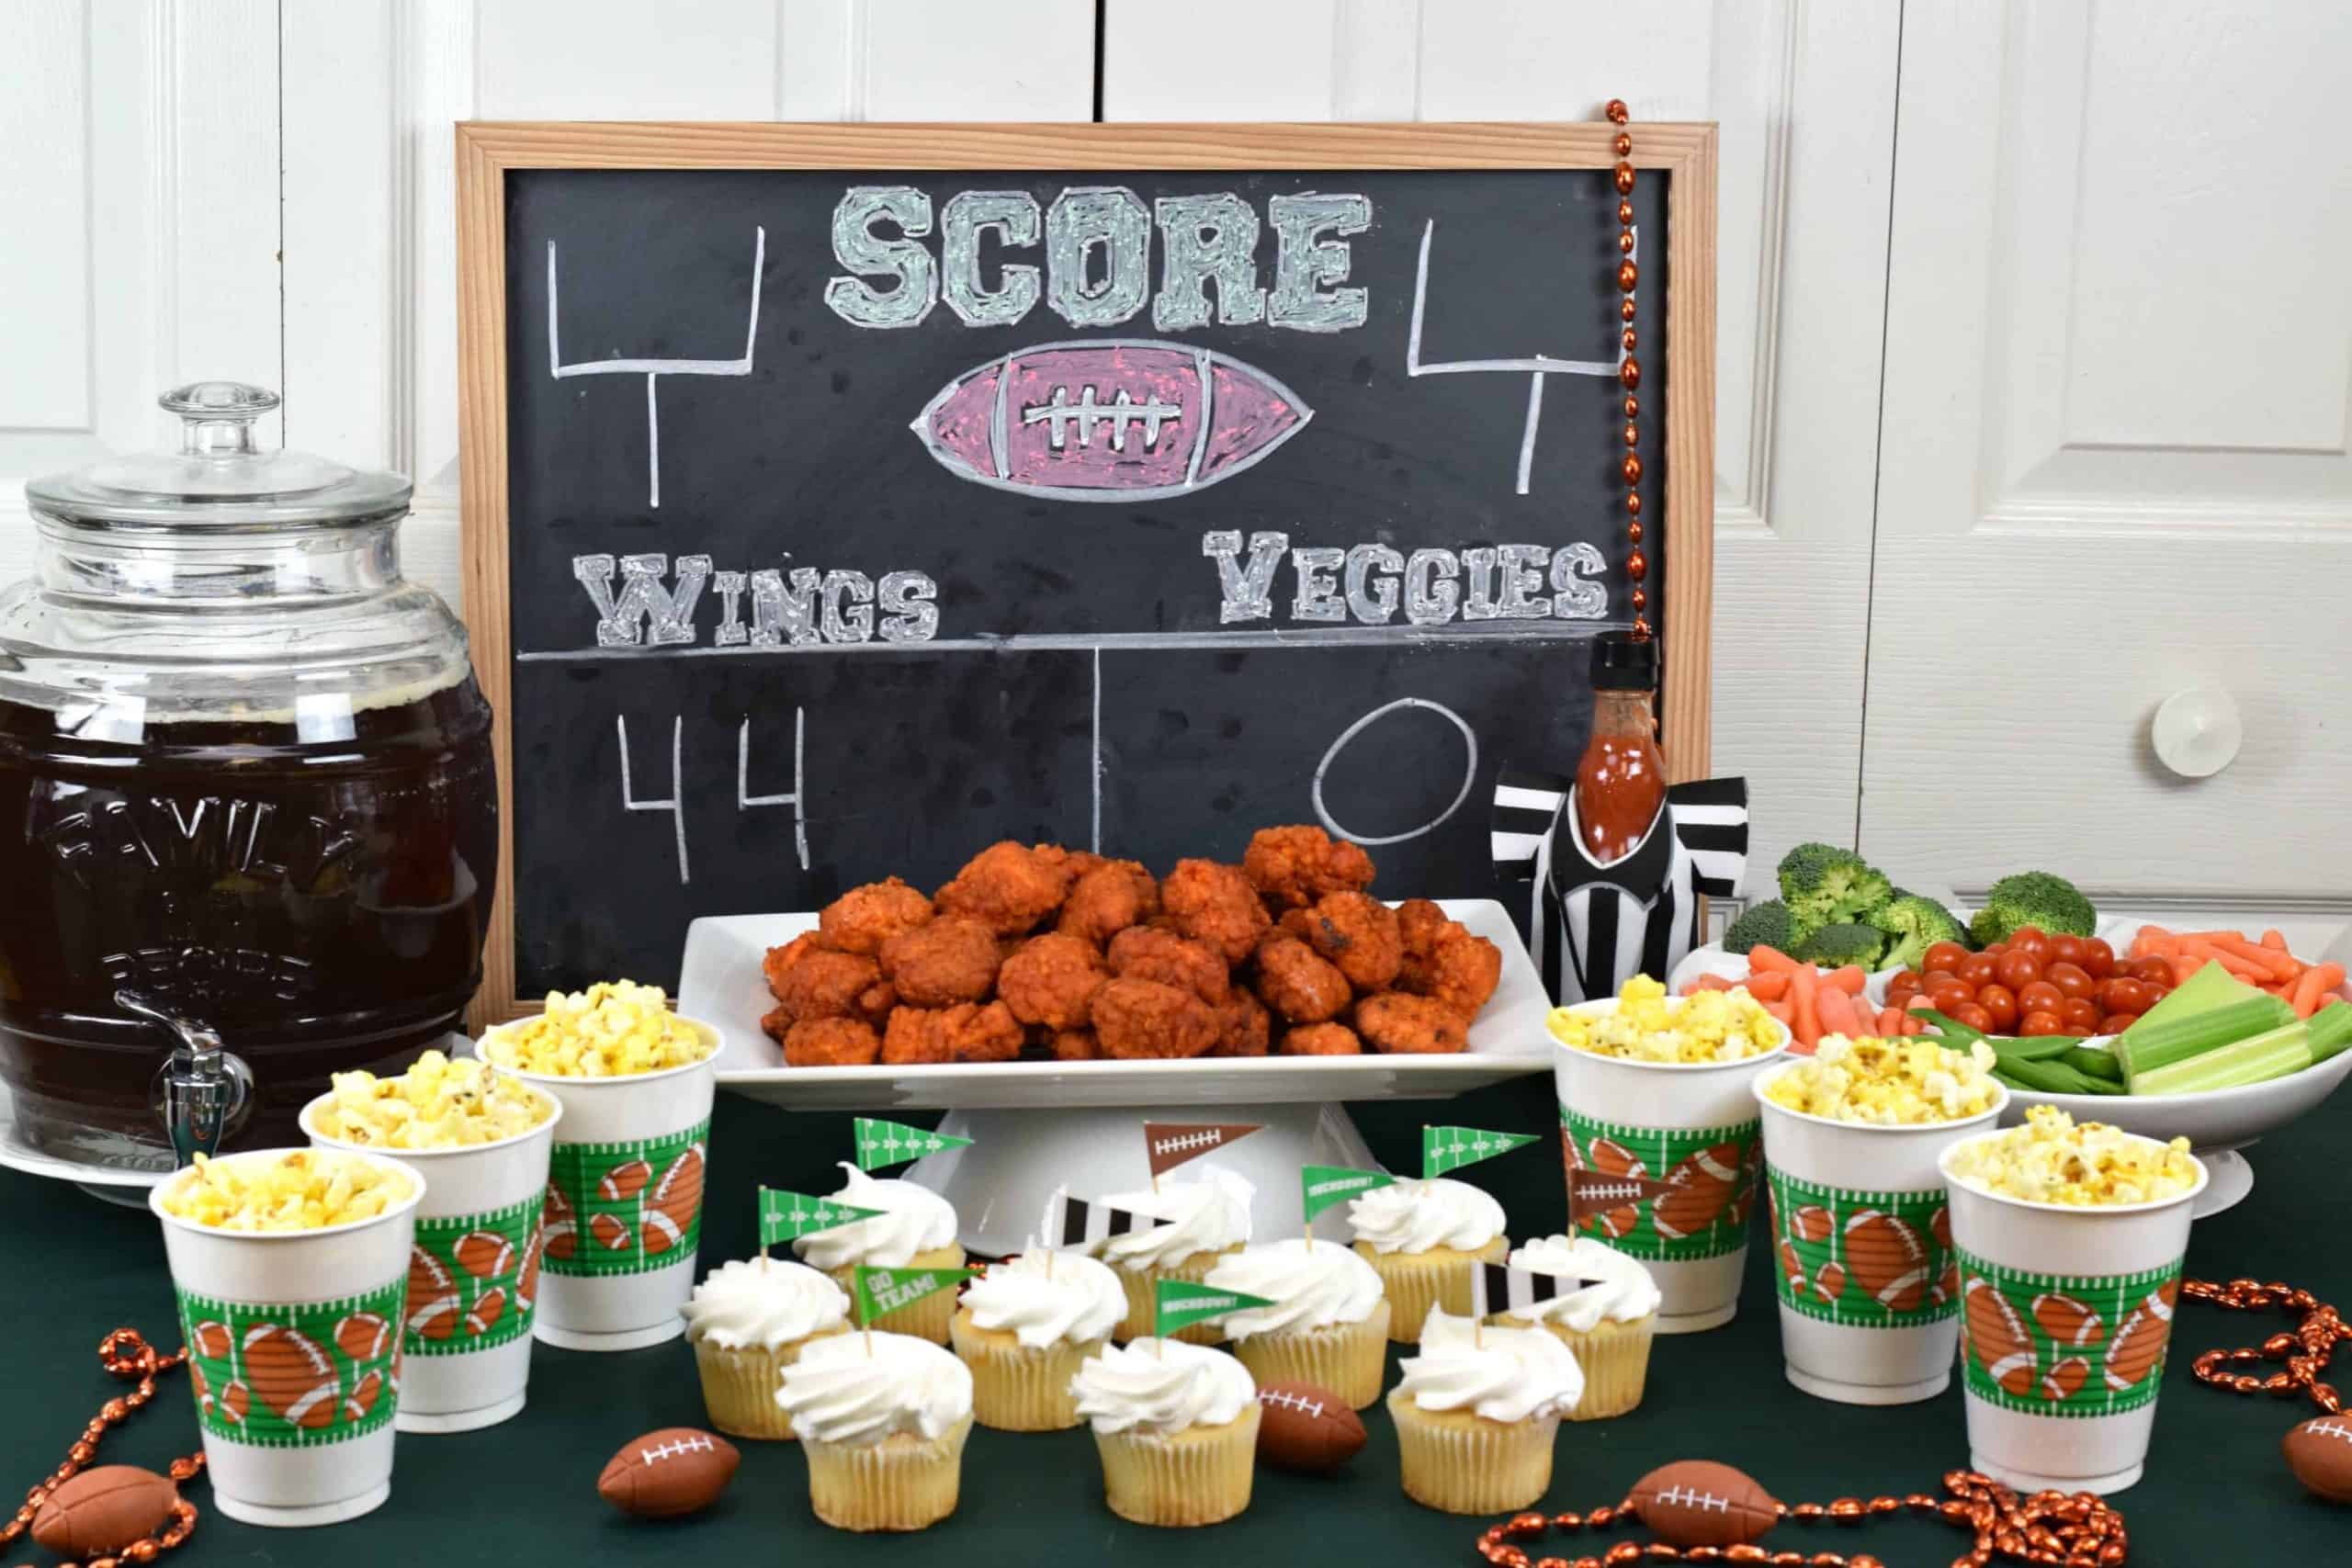 Tyson® Boneless Wyngz* for the MVP (Most Valuable Platter) at your Super Bowl Party!